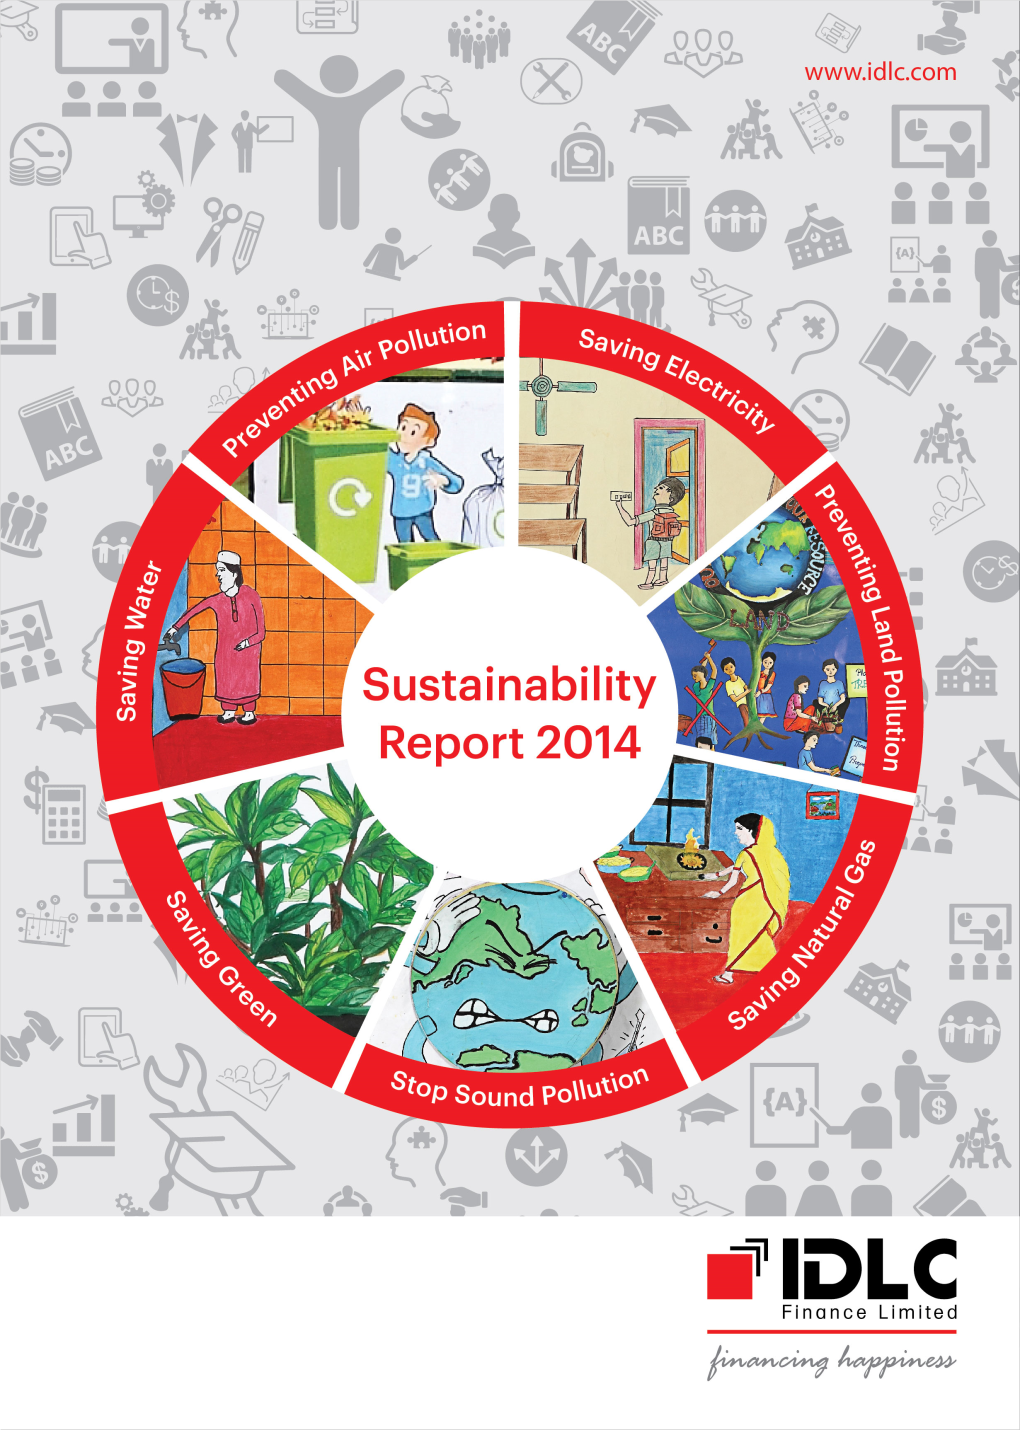 IDLC First Published Its Sustainability Report in 2012, Following the GRI - G3.1 Guidelines